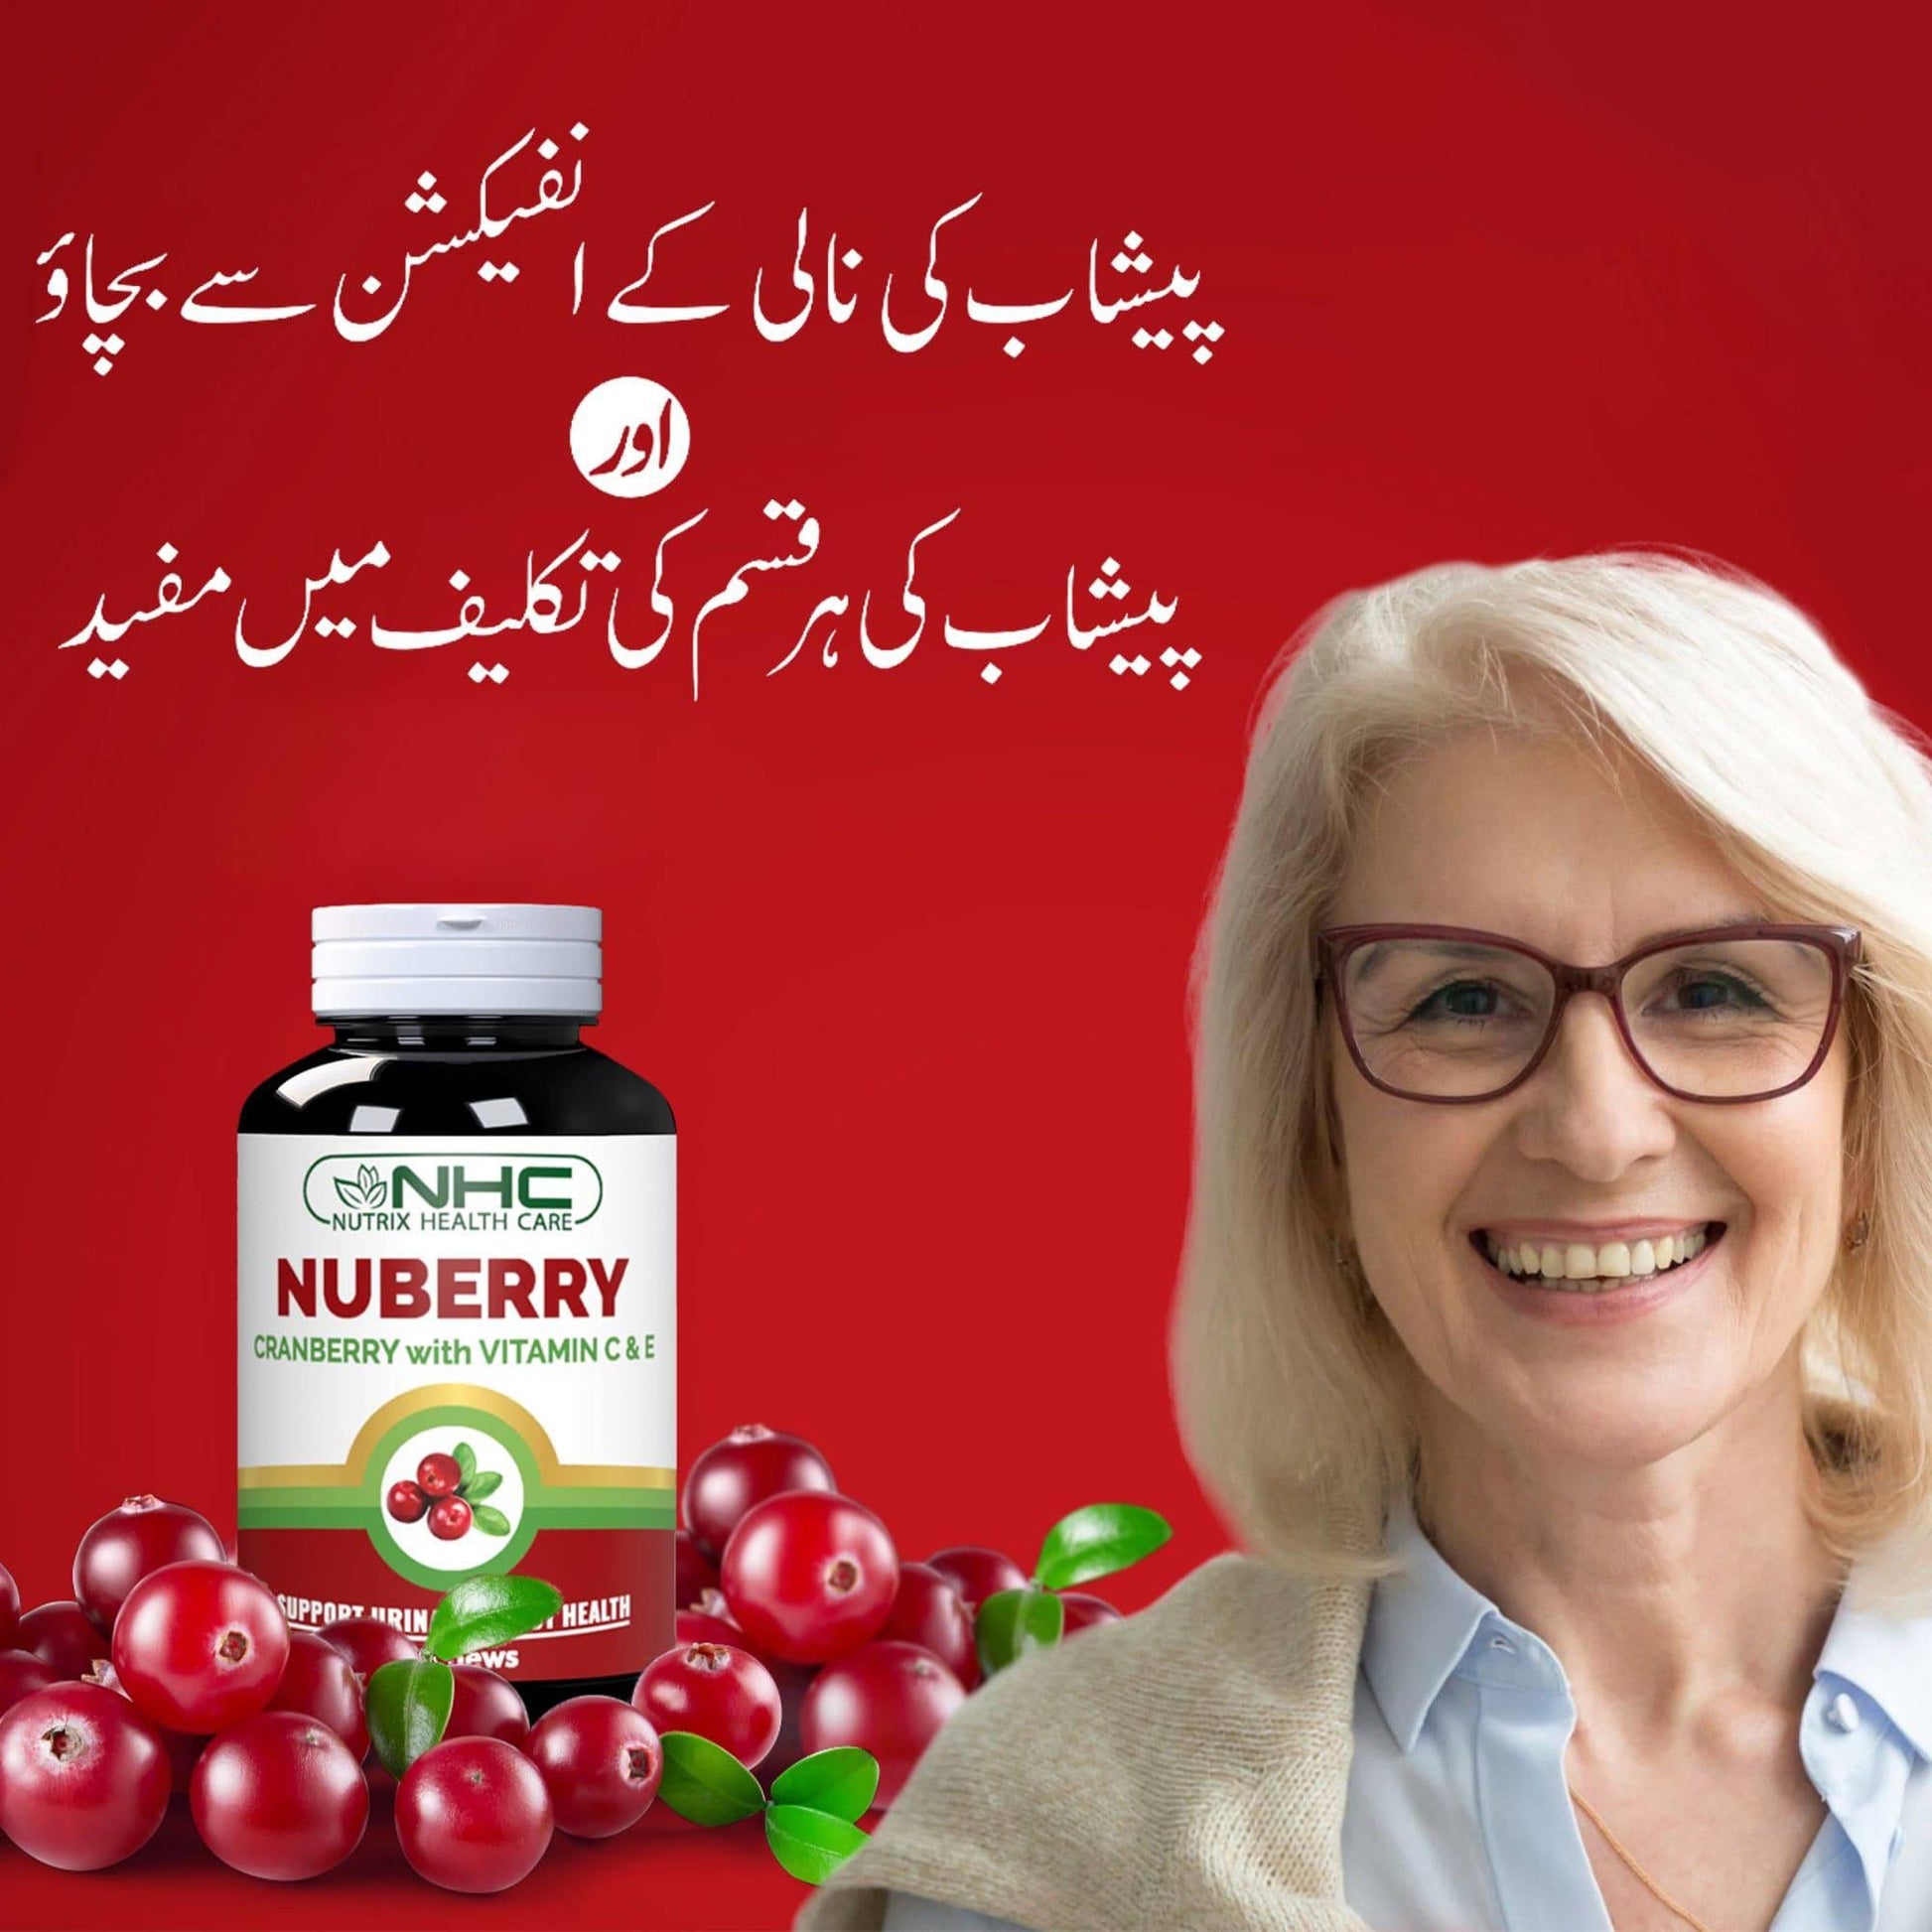 NUBERRY SUPPORTS URINARY TRACT HEALTH - Healthifyme.pk